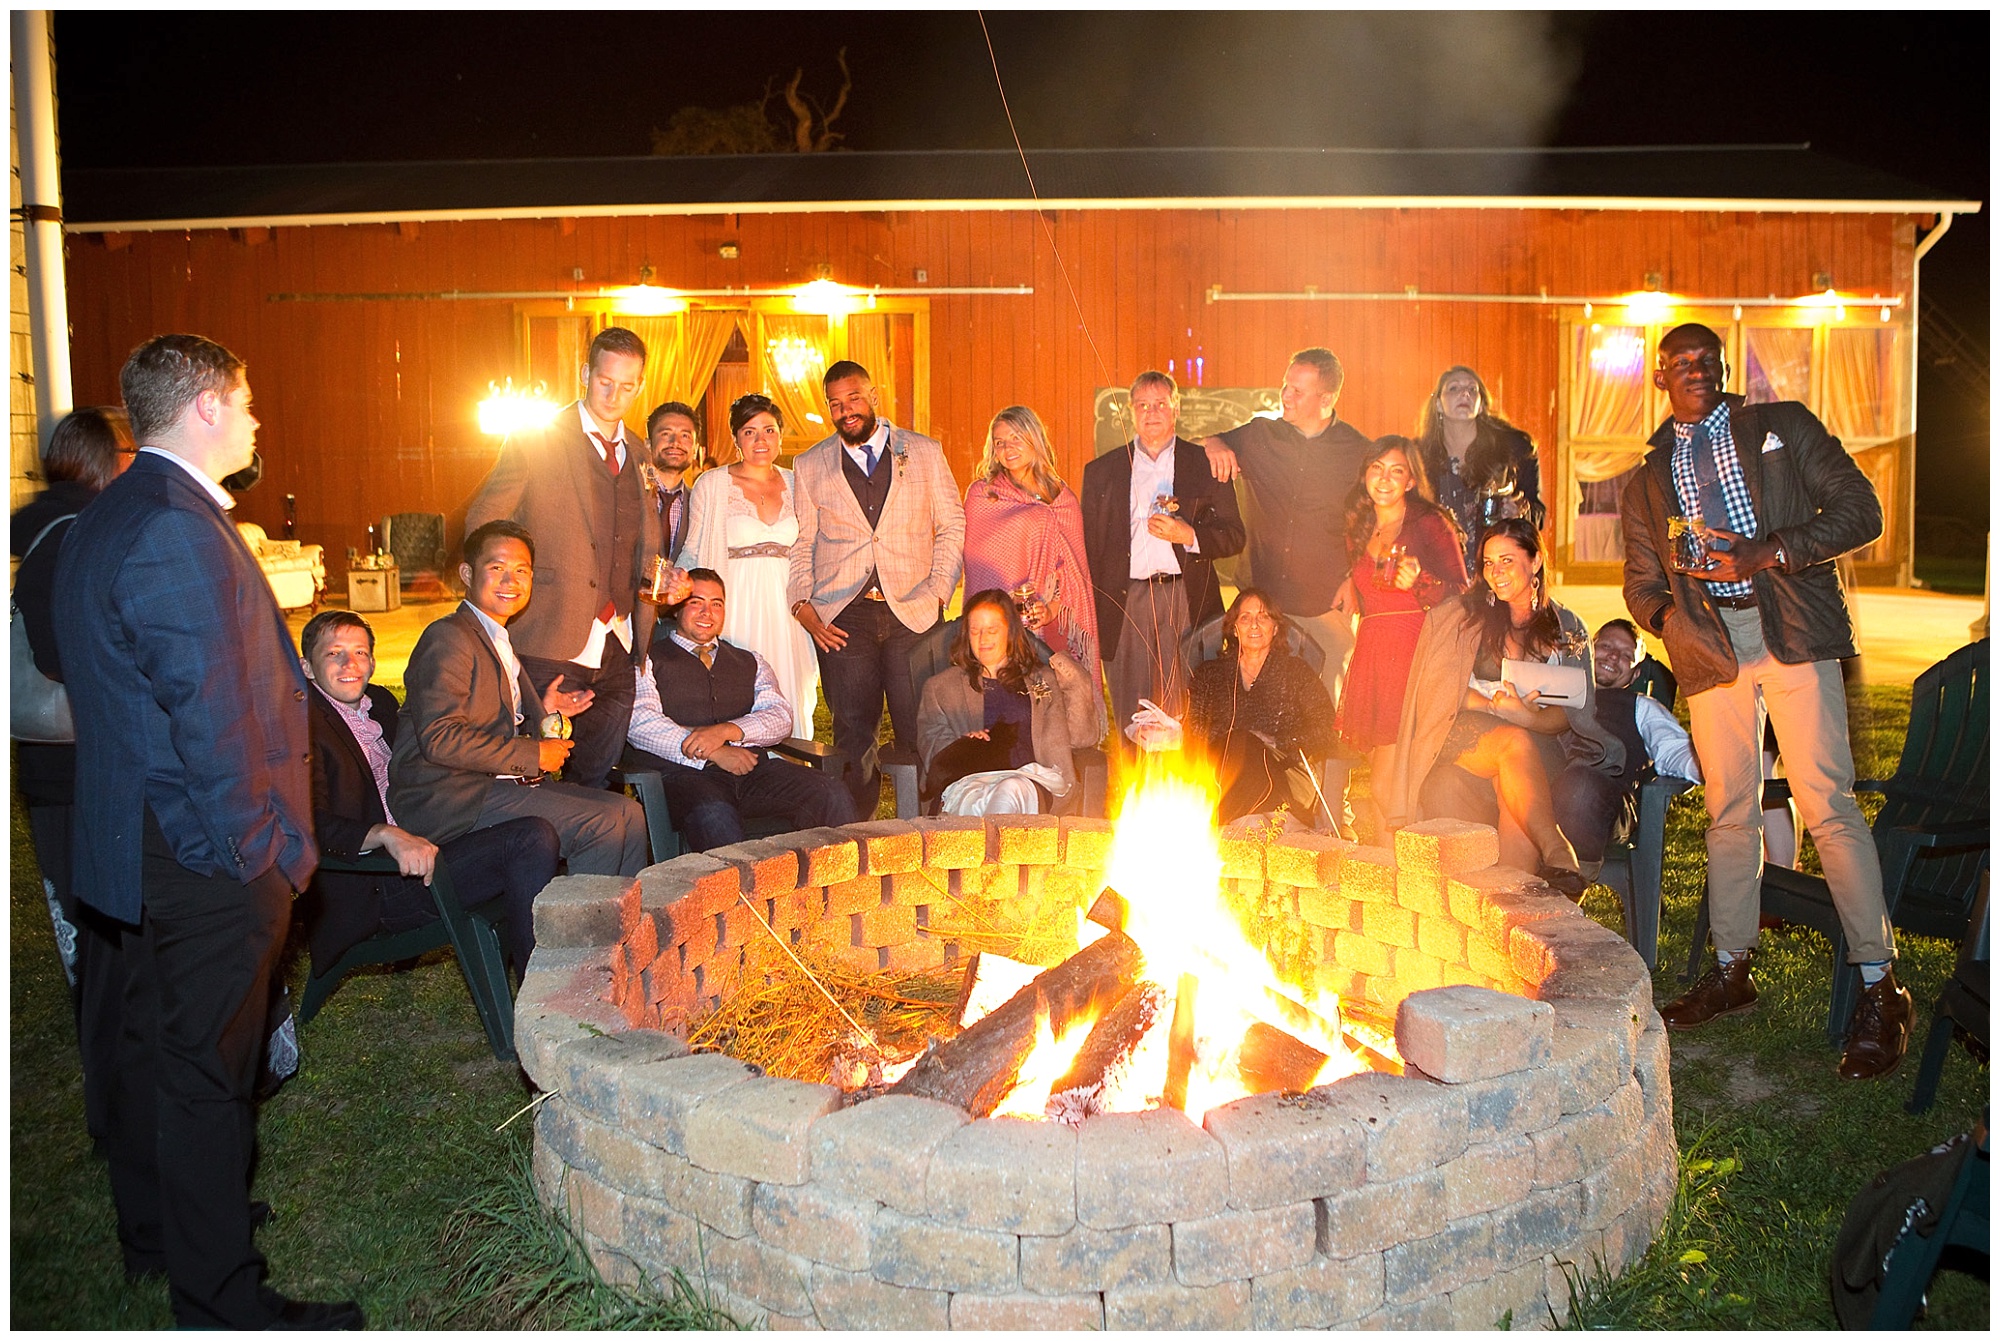 Photo of wedding party and friends around a fire pit outside of the wedding reception barn.